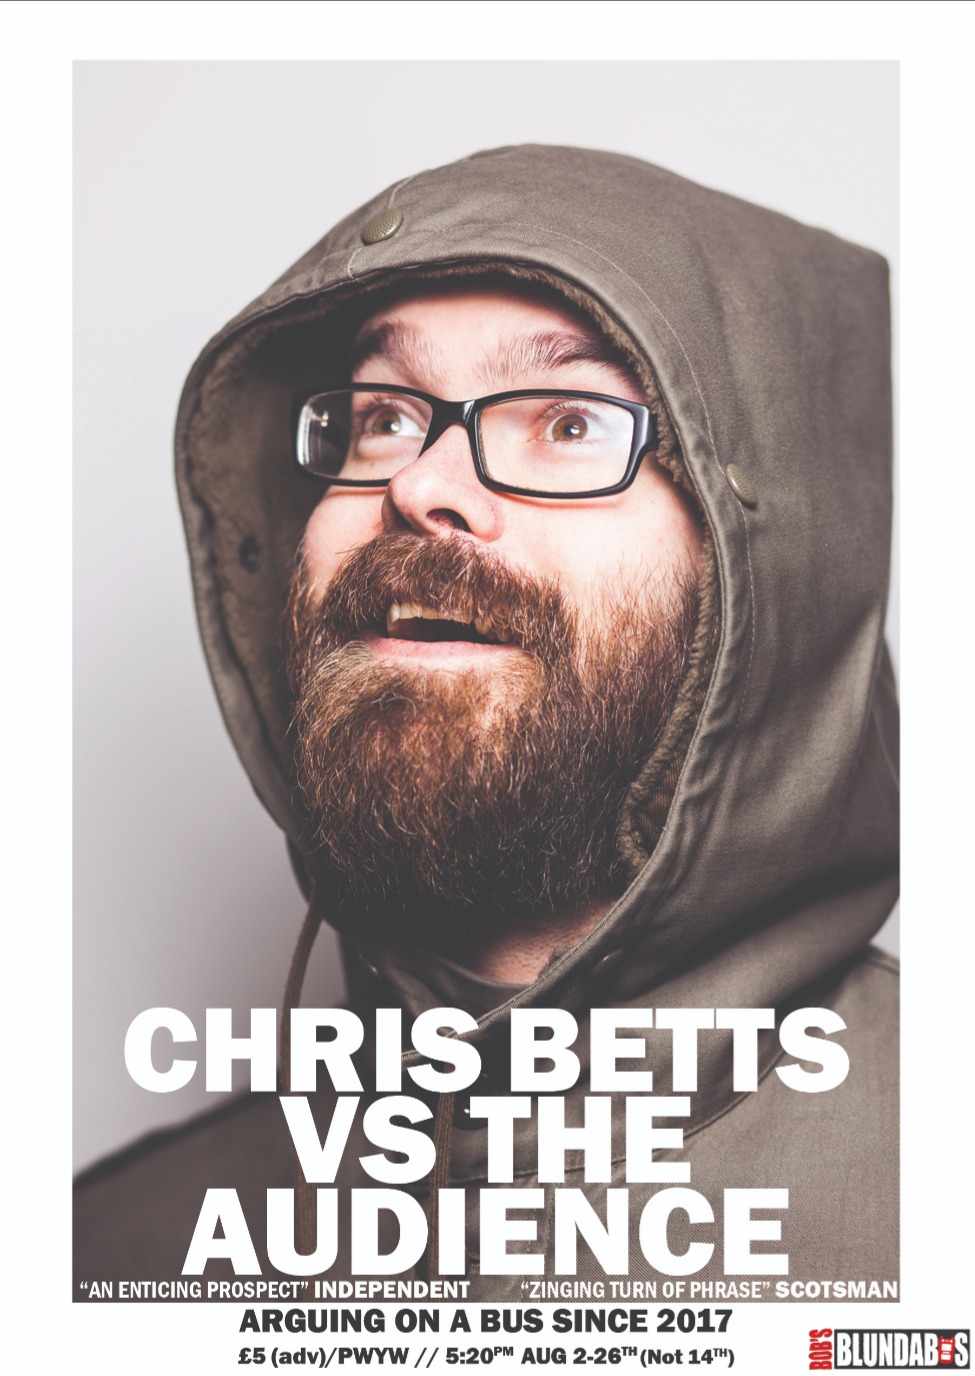 The poster for Chris Betts vs the Audience